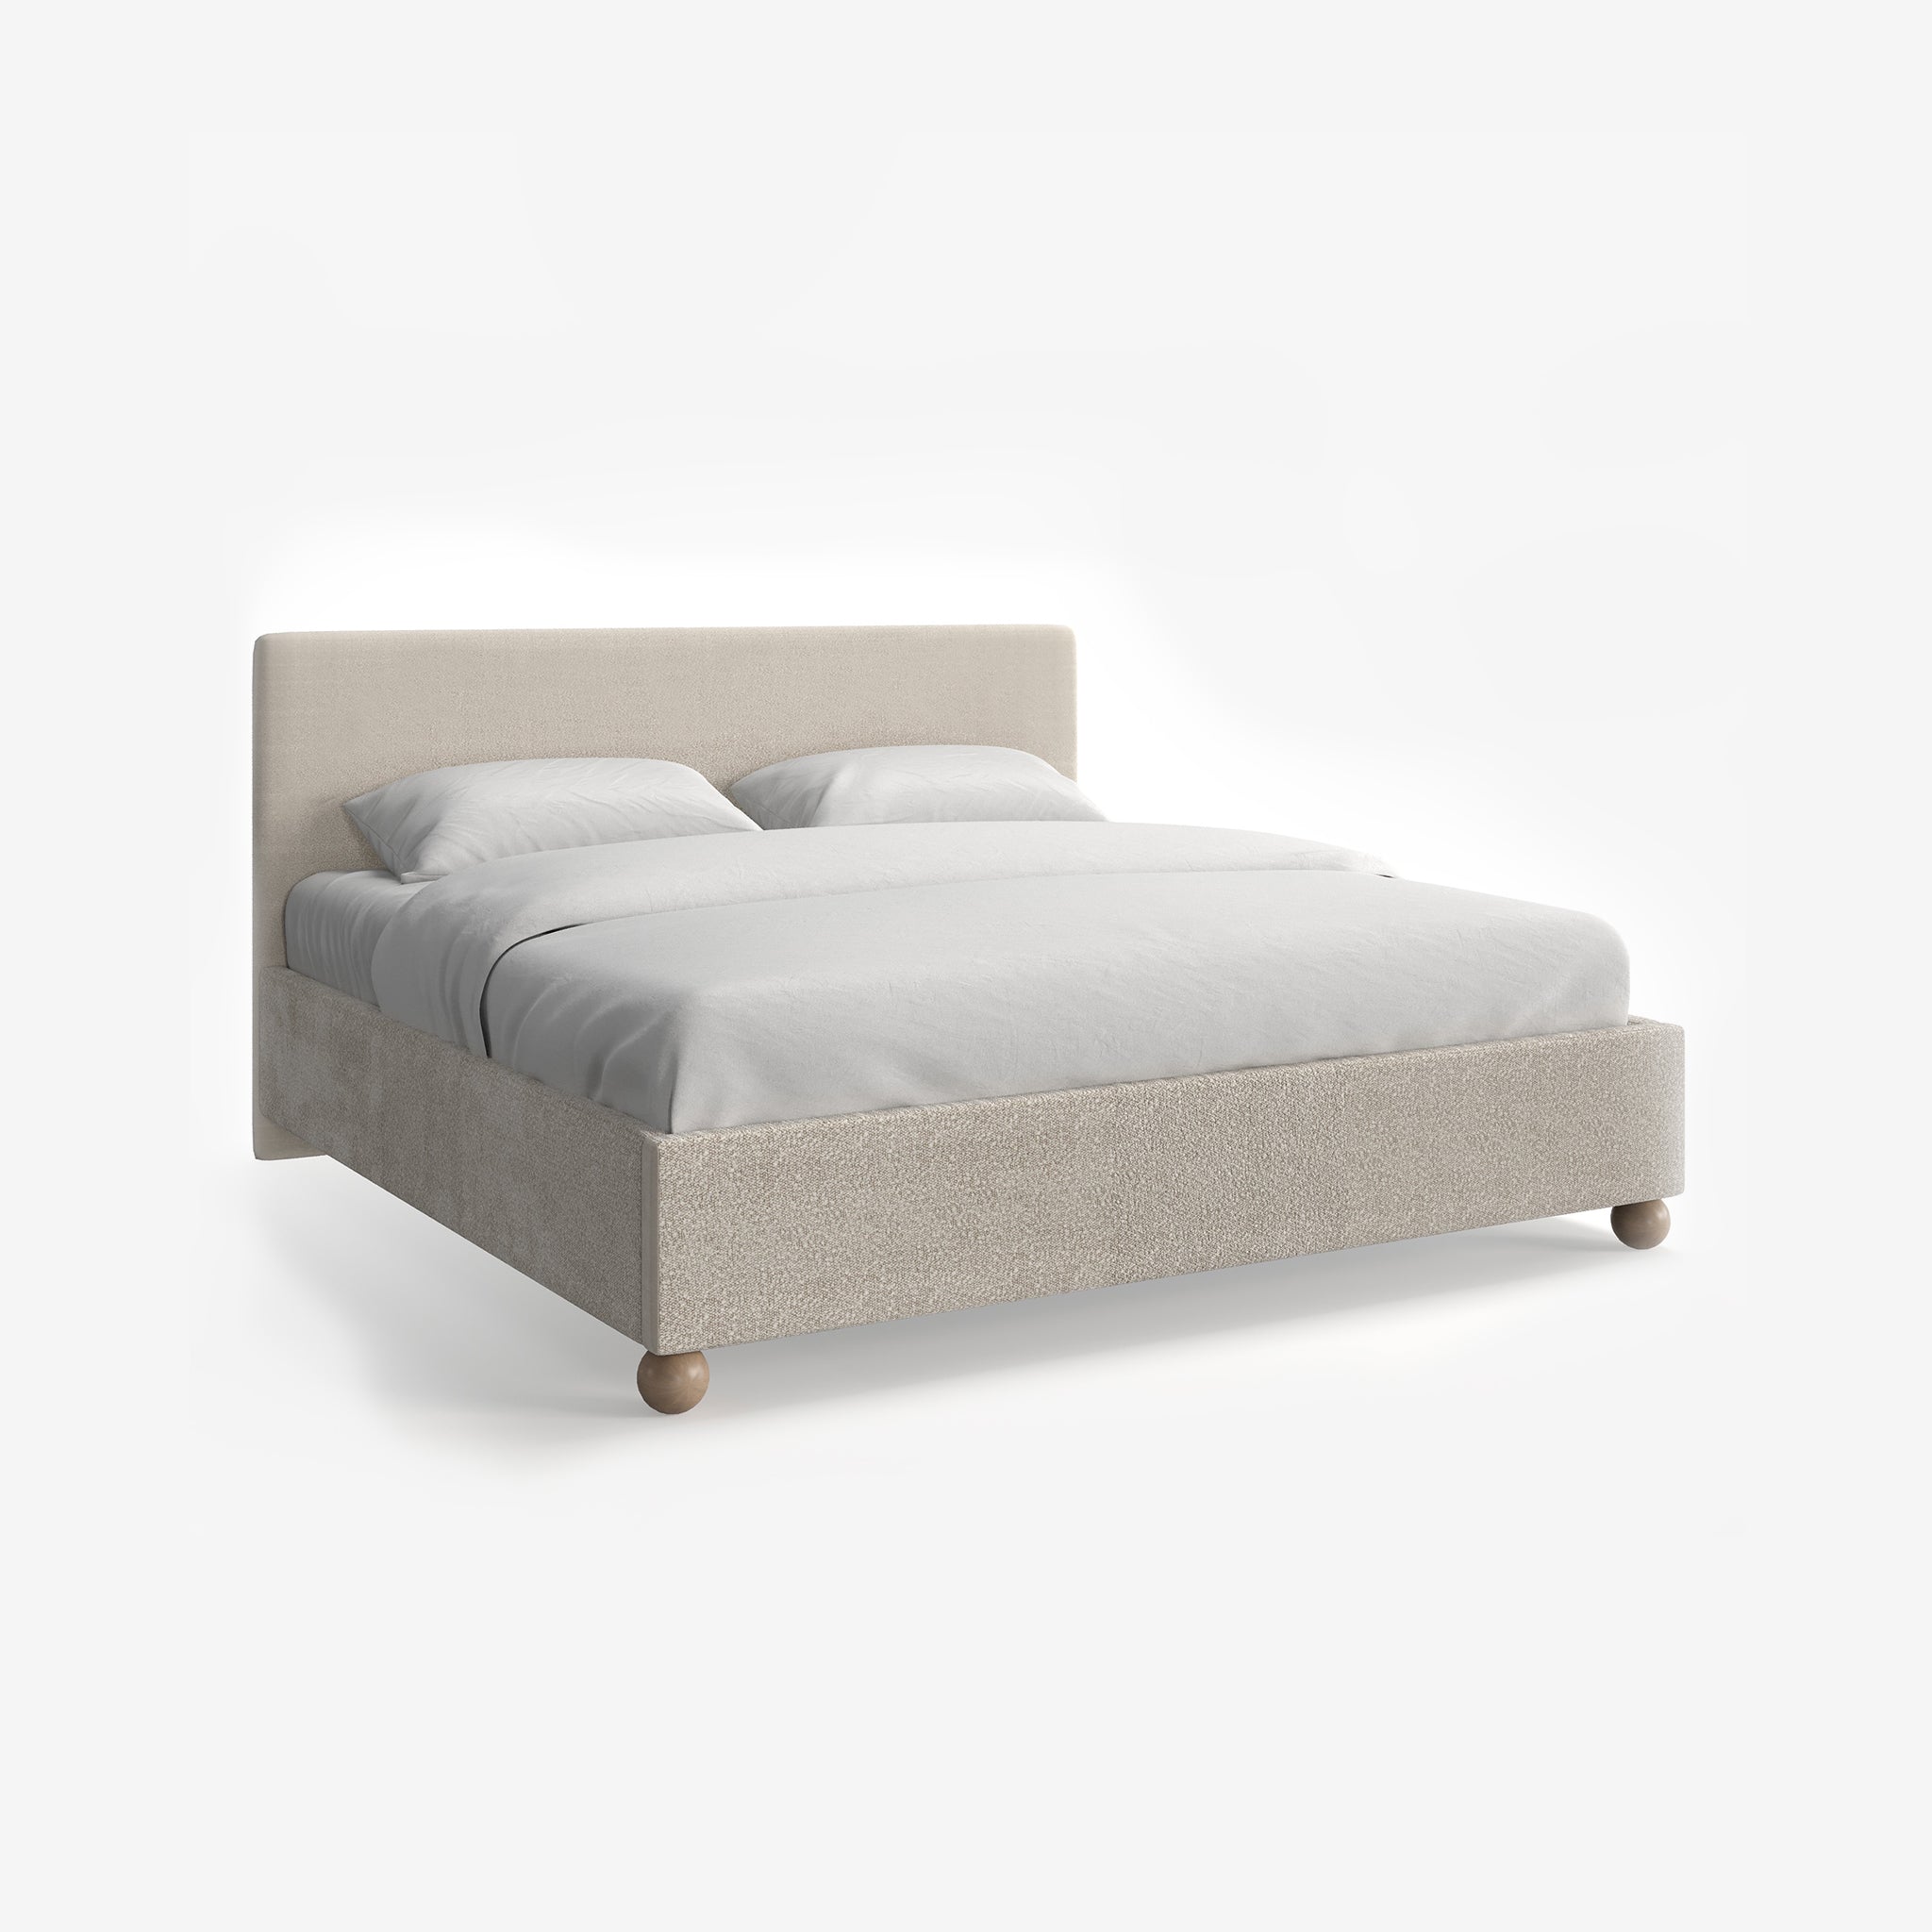 O'Halloran Beige Boucle Upholstered Bed with end-lift Ottoman Storage, Contemporary Interiors, Online Shopping, Craftsmanship, Wooden feet, Bazaar